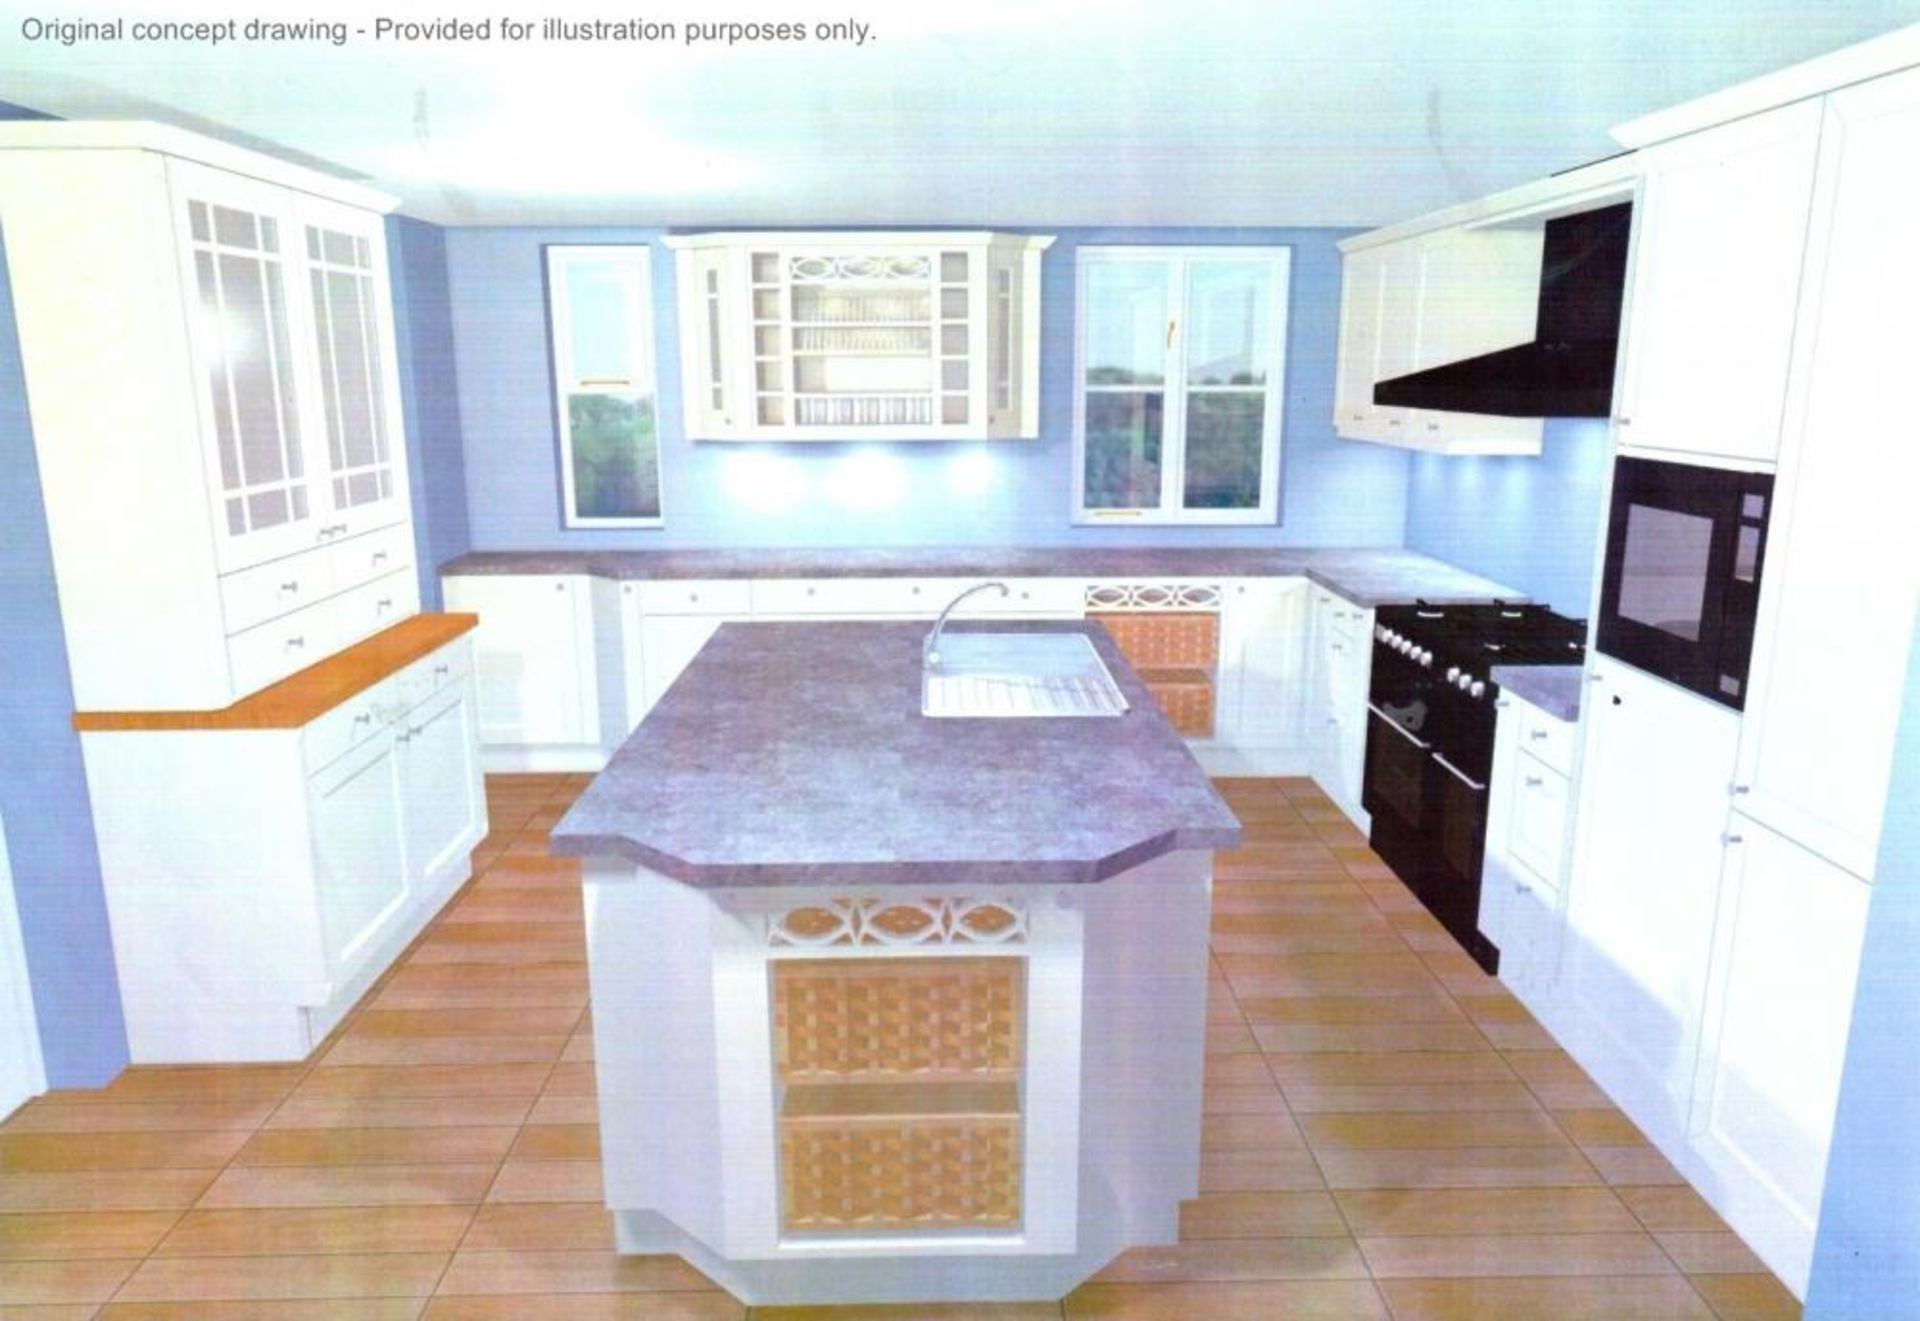 1 x Beautiful Bespoke Shaker-Style Kitchen In Cream With Central Island, Siemens Appliances And Gran - Image 20 of 30